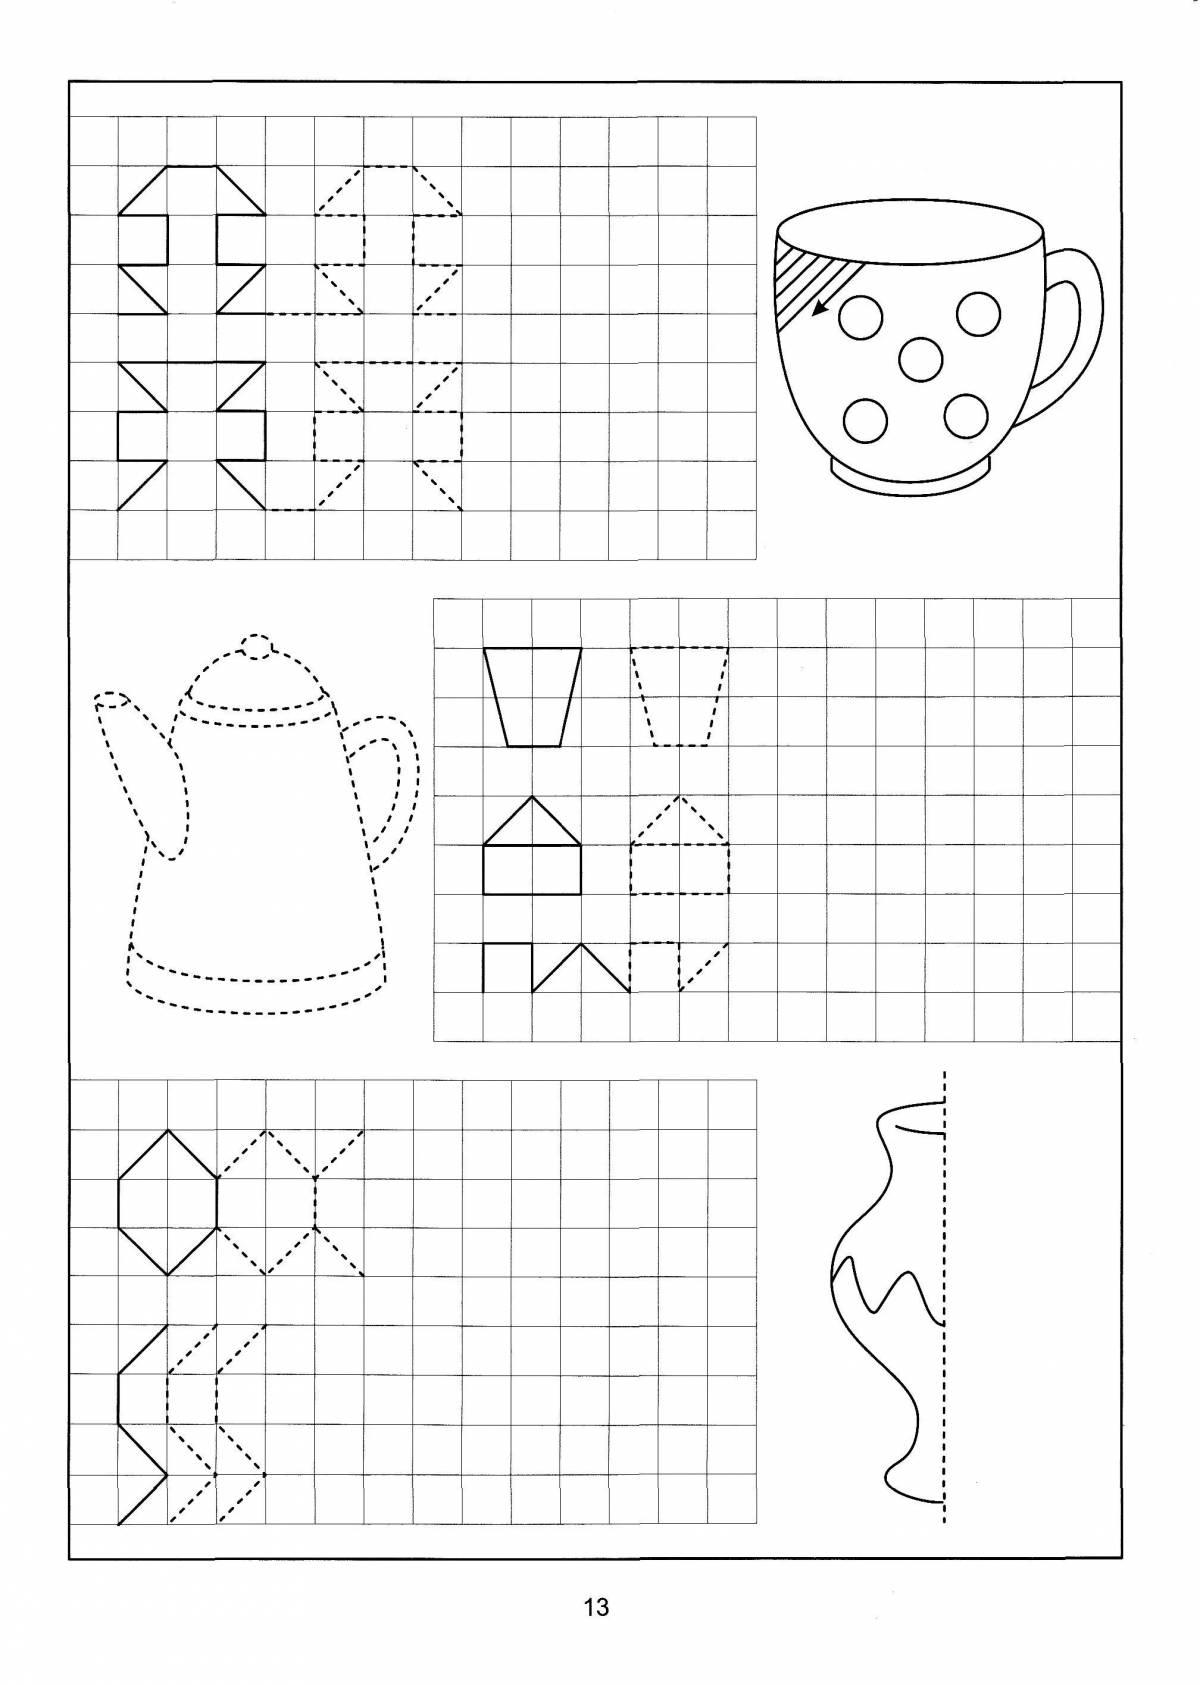 Entertaining children's coloring pages getting ready for school